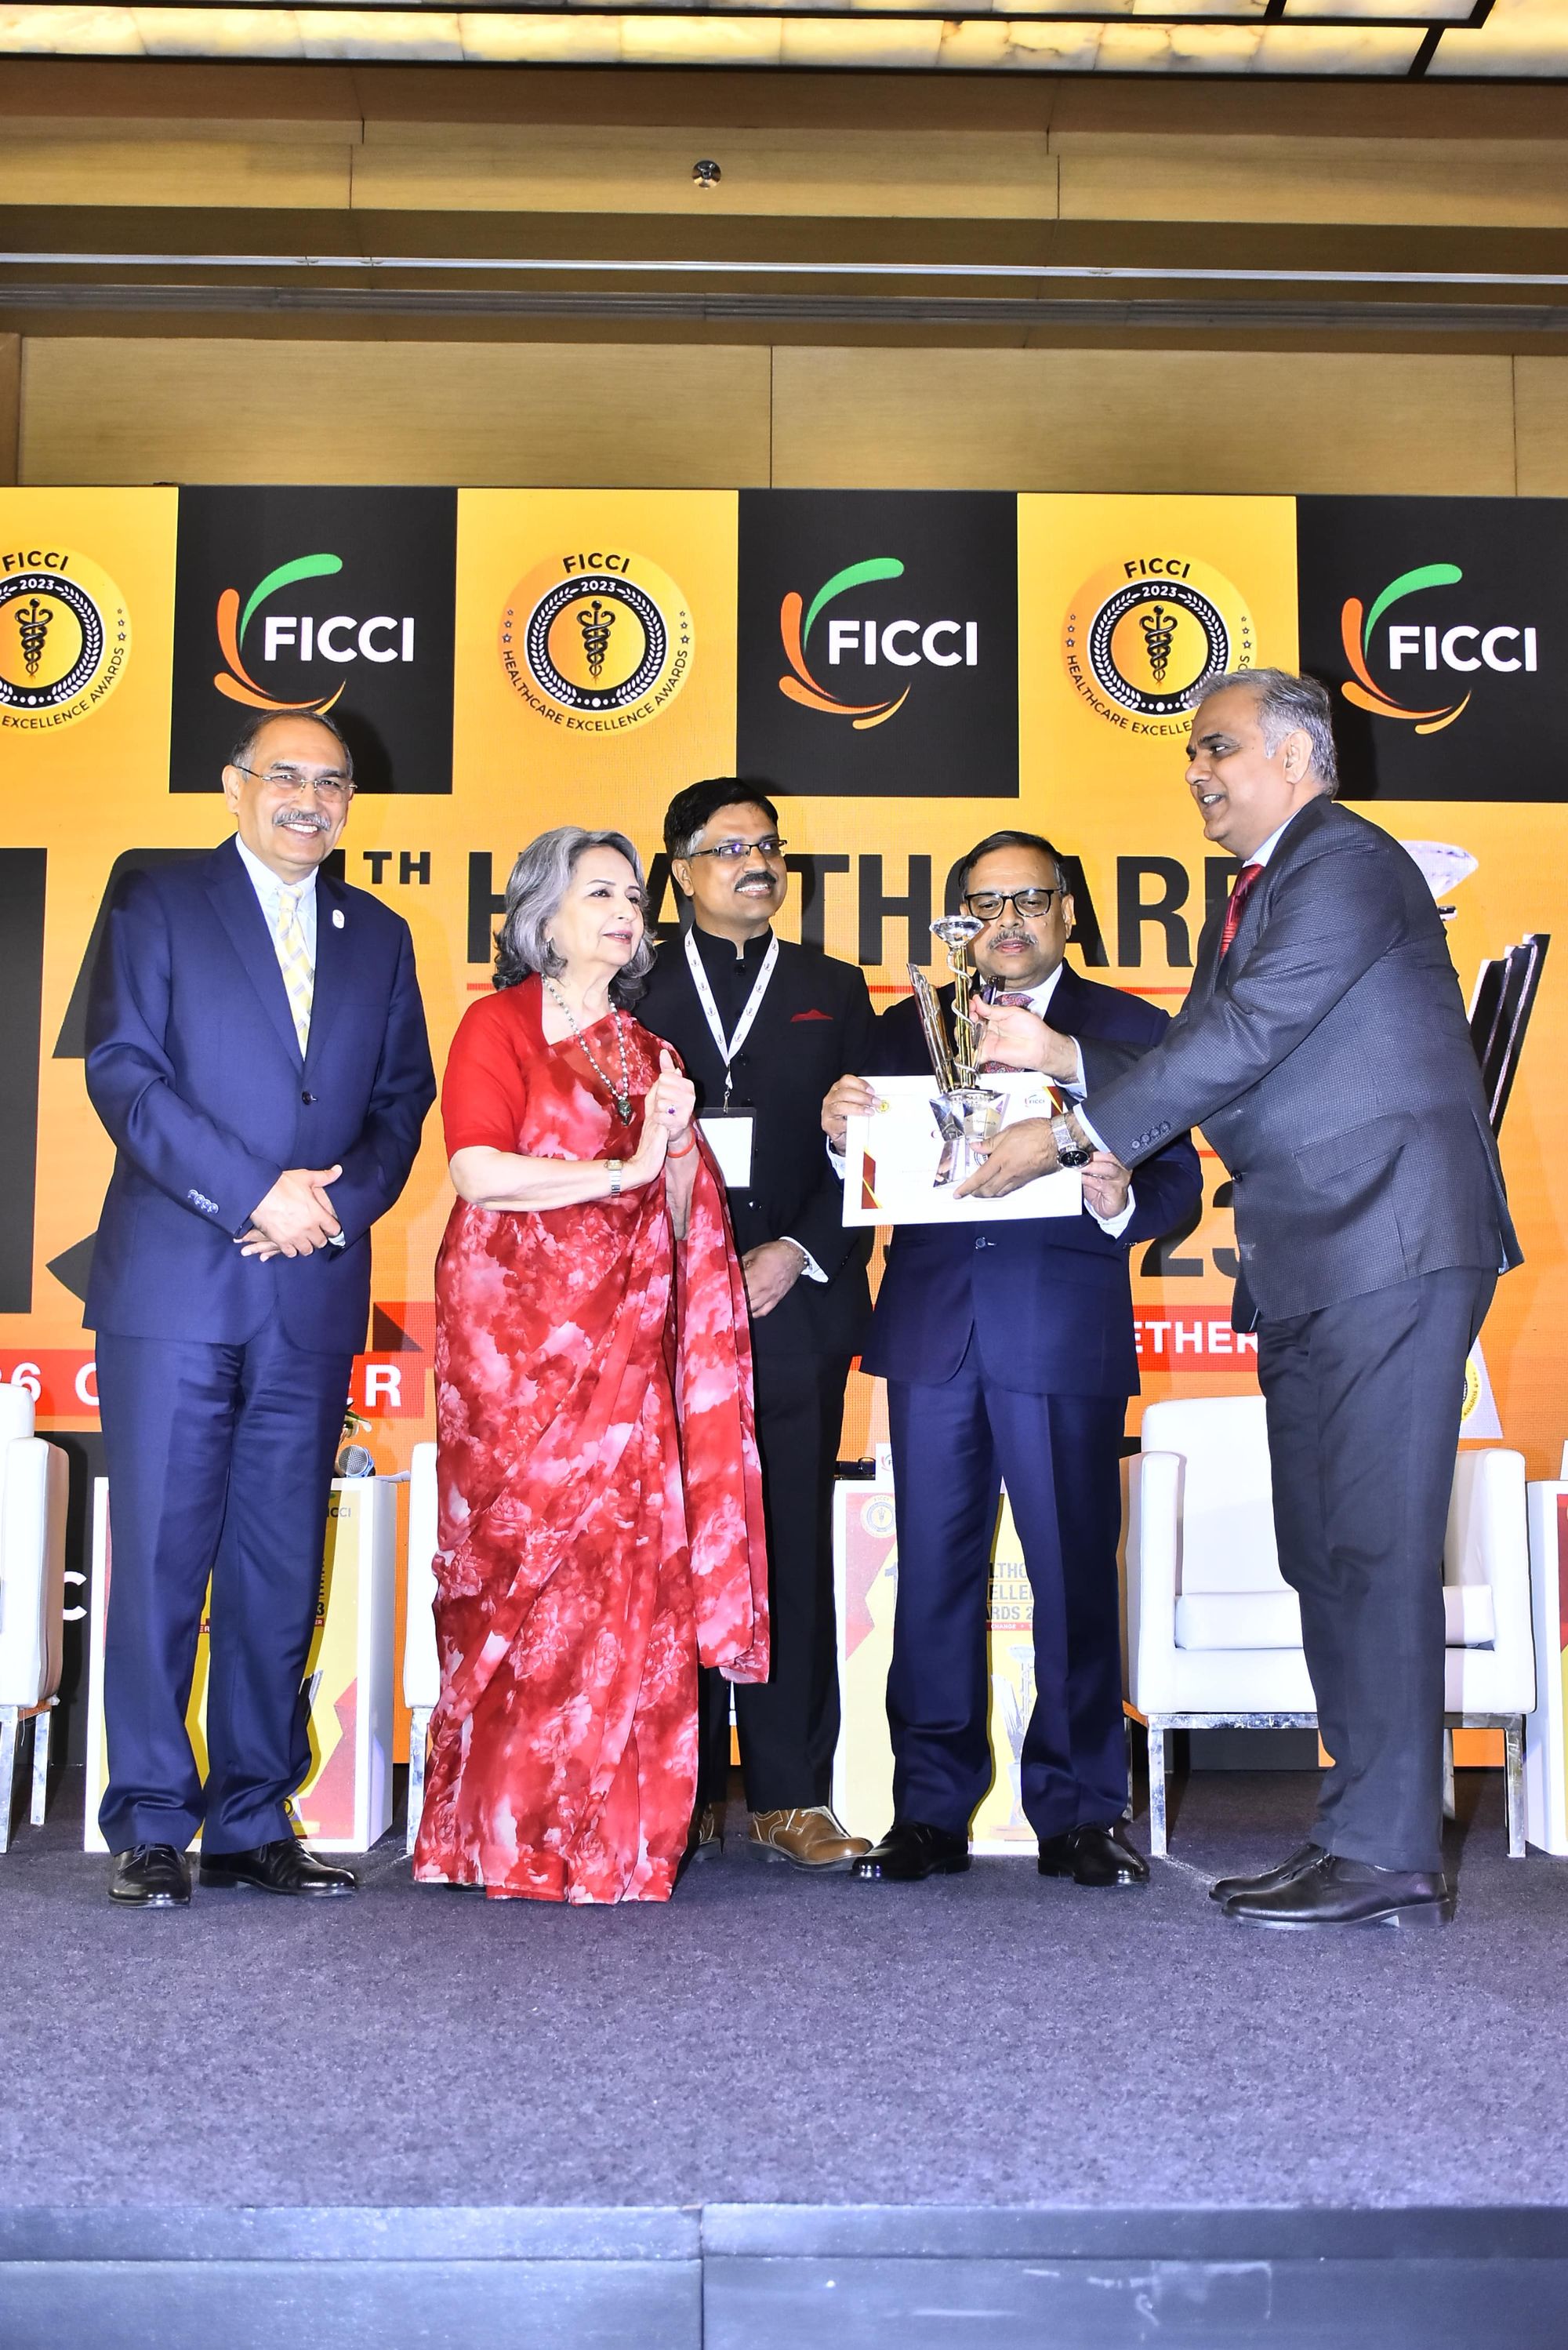 Venus Remedies Honored with FICCI Healthcare Awards 2023!